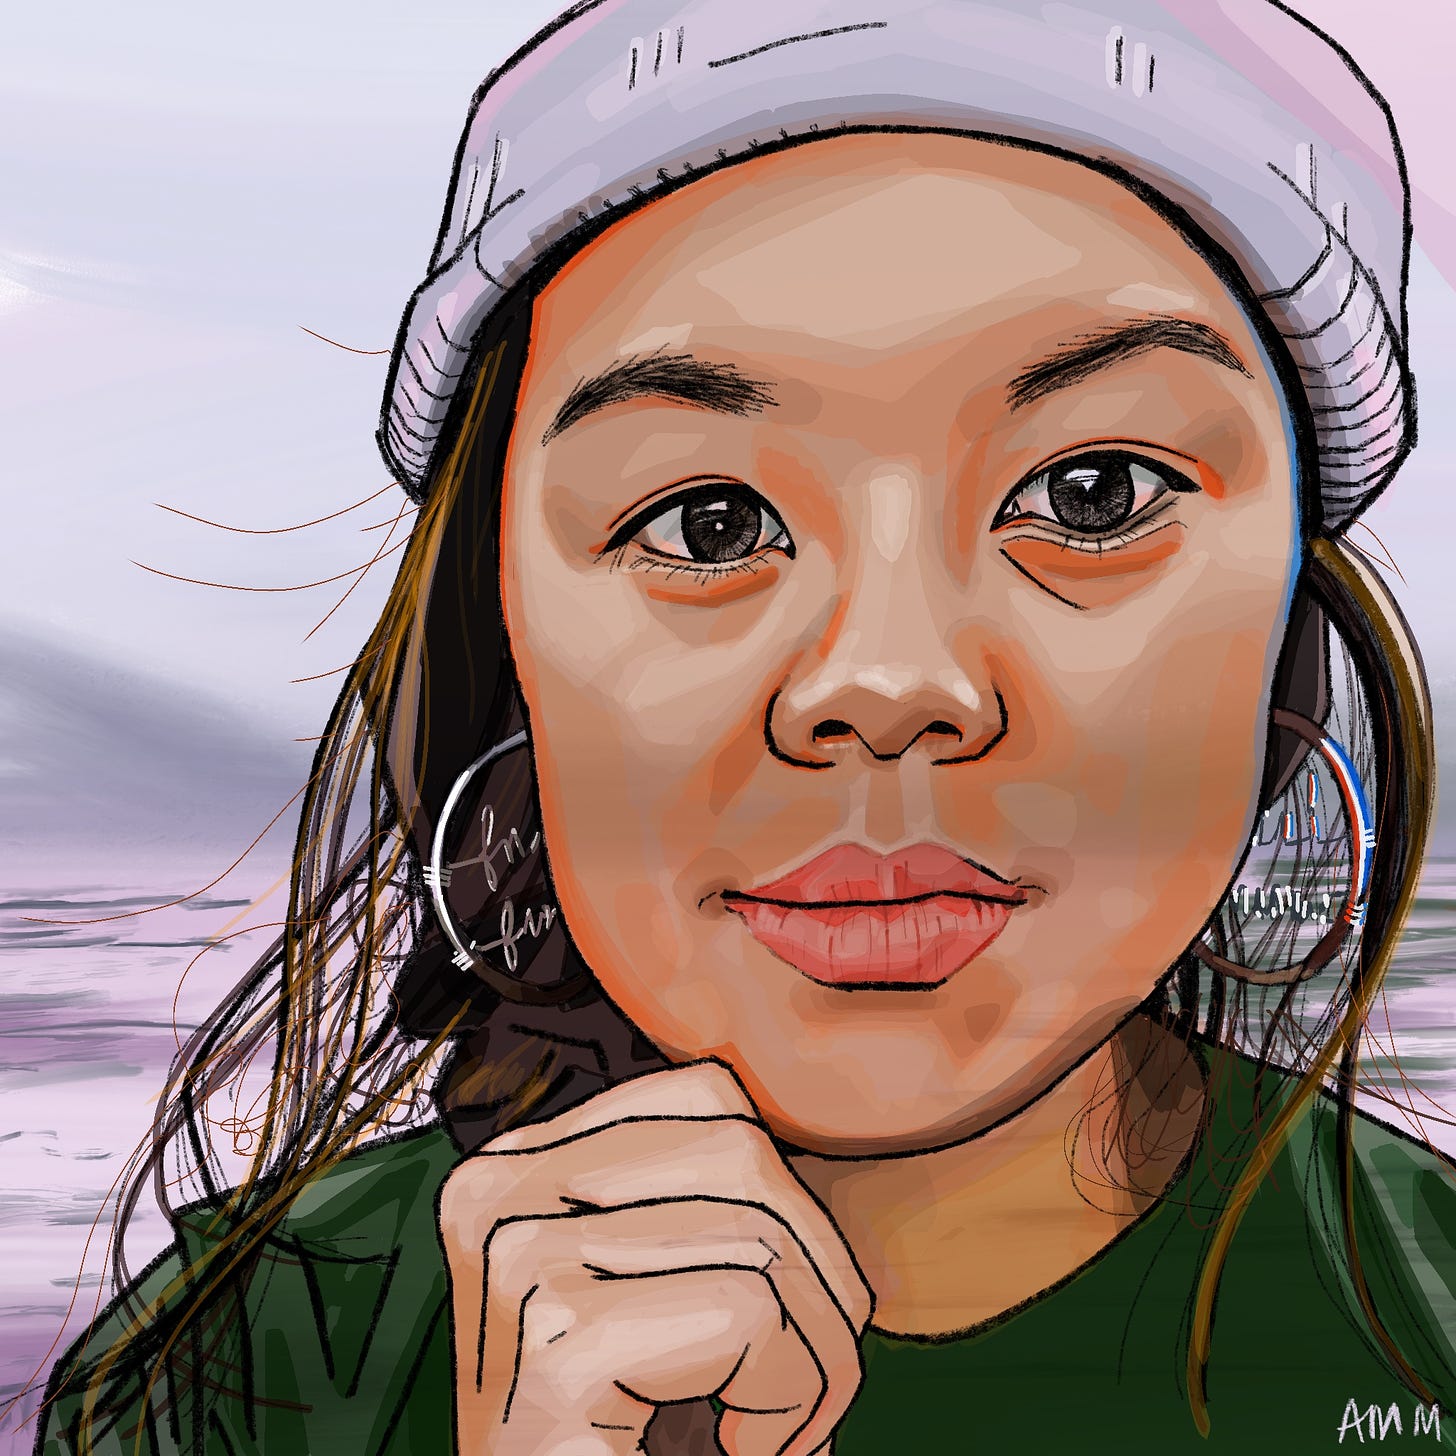 Illustration of Erica in a grey toque and hoop earrings, she faces the camera with the water behind her